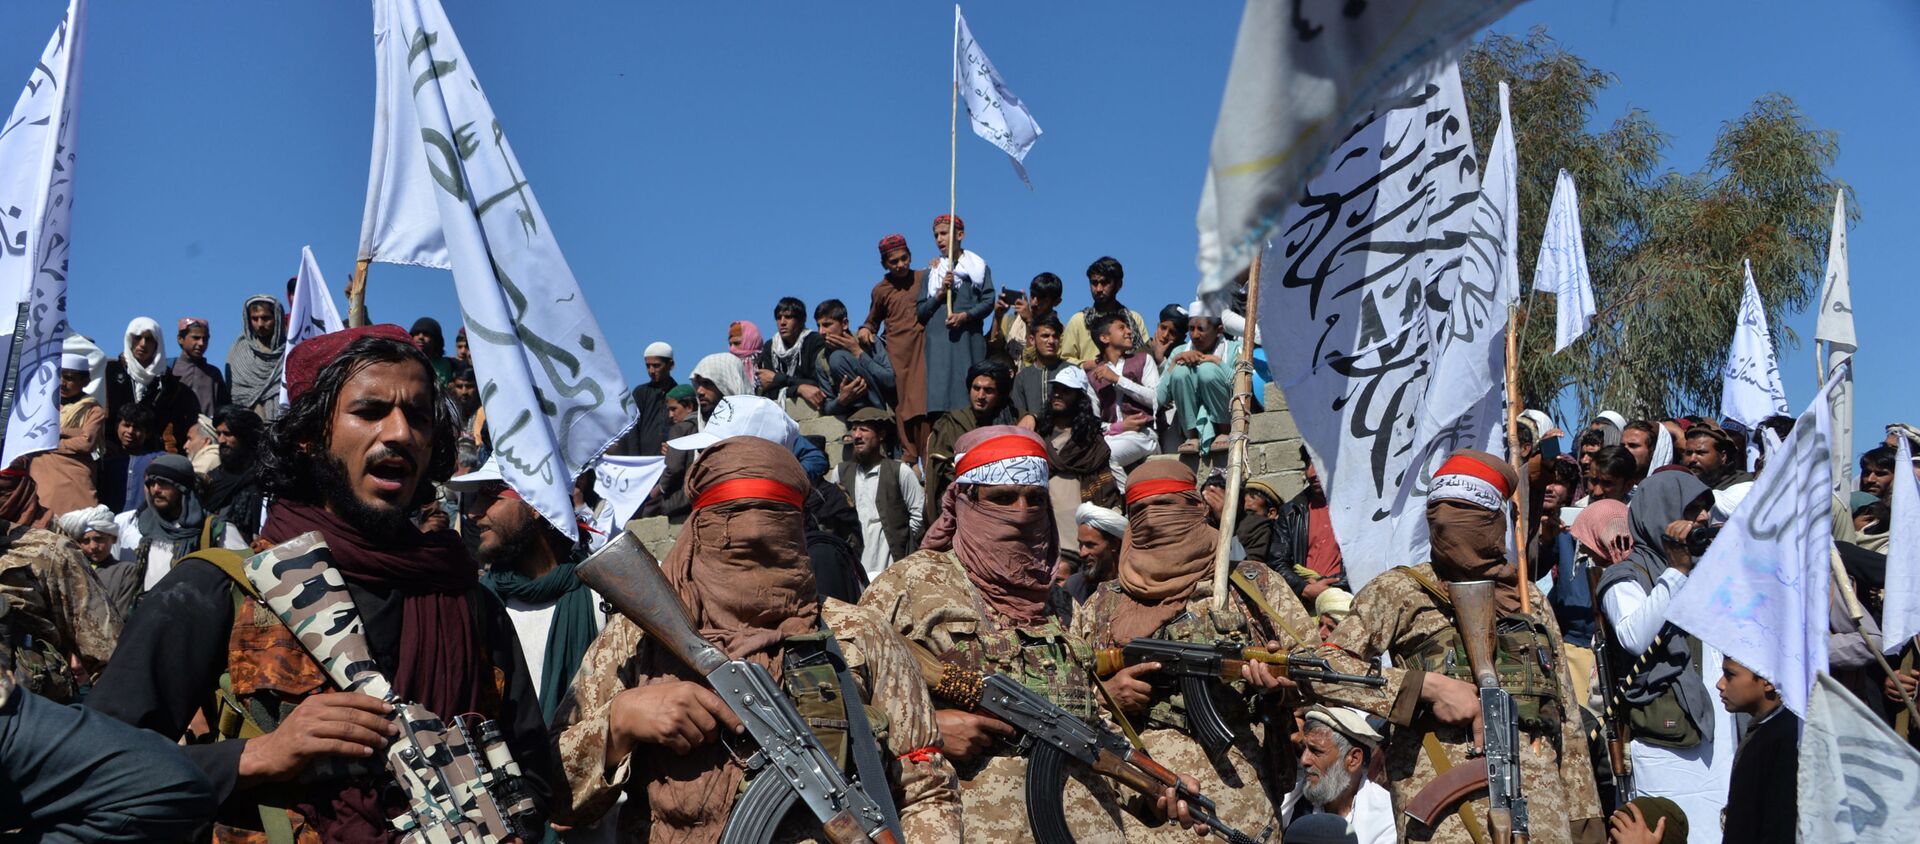 Afghan Taliban militants and villagers attend a gathering as they celebrate the peace deal and their victory in the Afghan conflict on US in Afghanistan, in Alingar district of Laghman Province on March 2, 2020 - Sputnik International, 1920, 16.08.2021